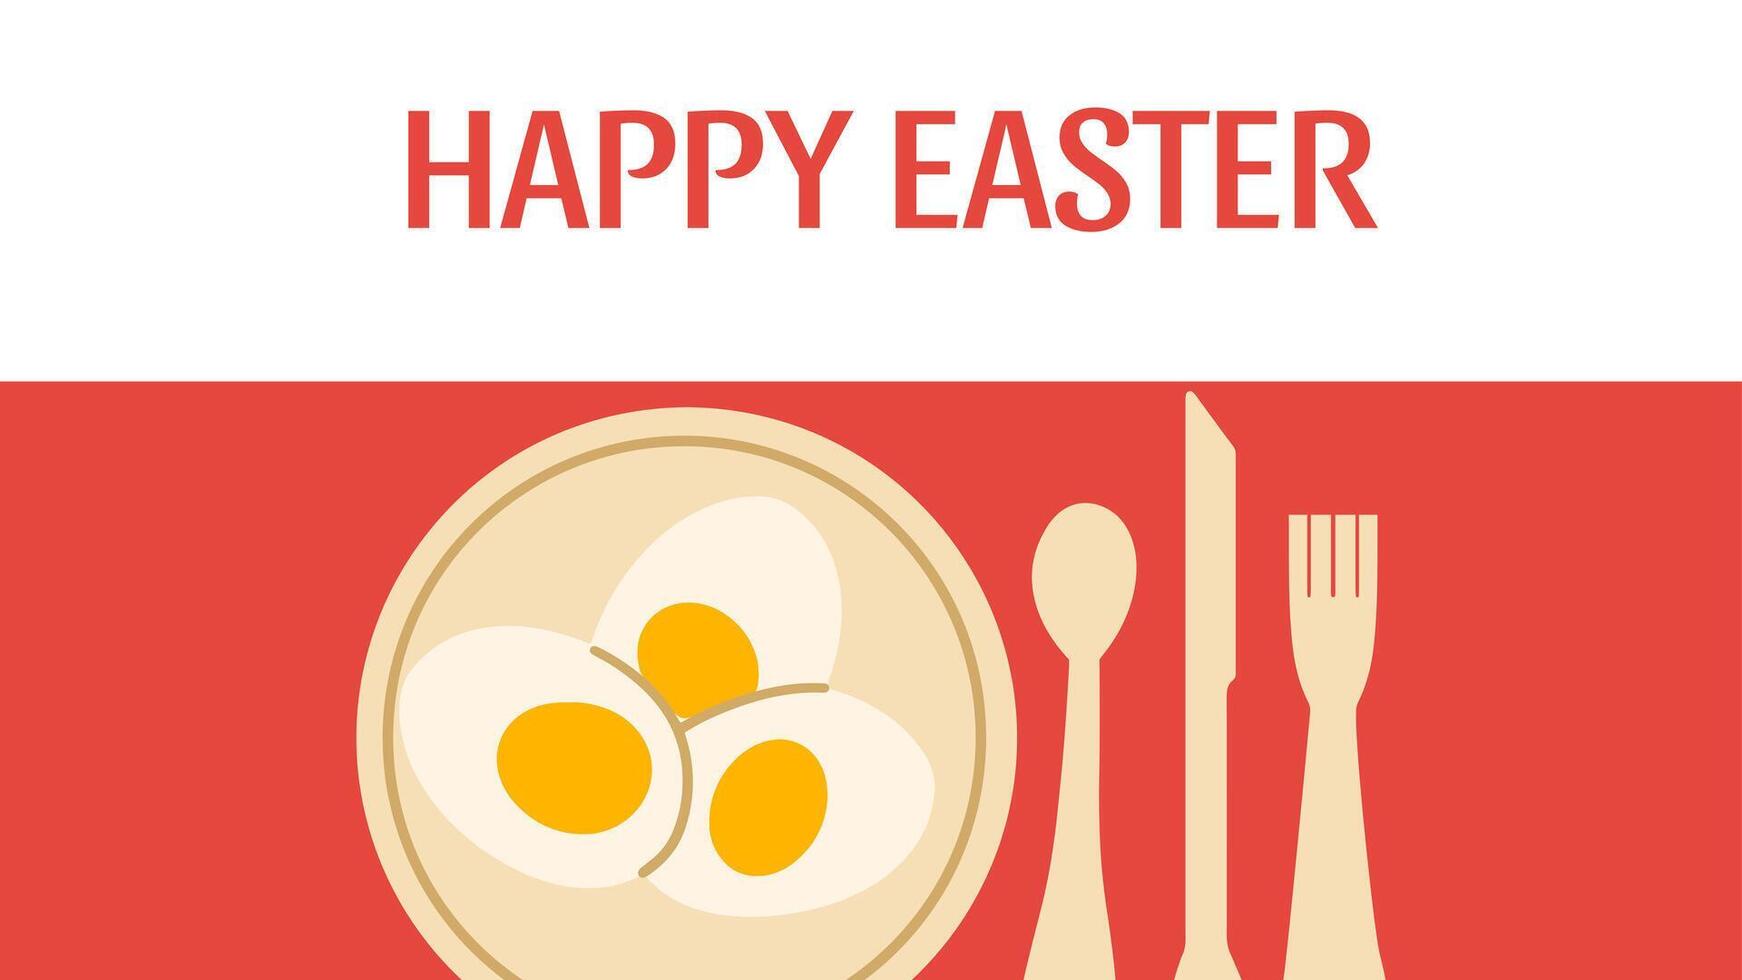 Happy Easter Eggs on plate fork, spoon and knife vector